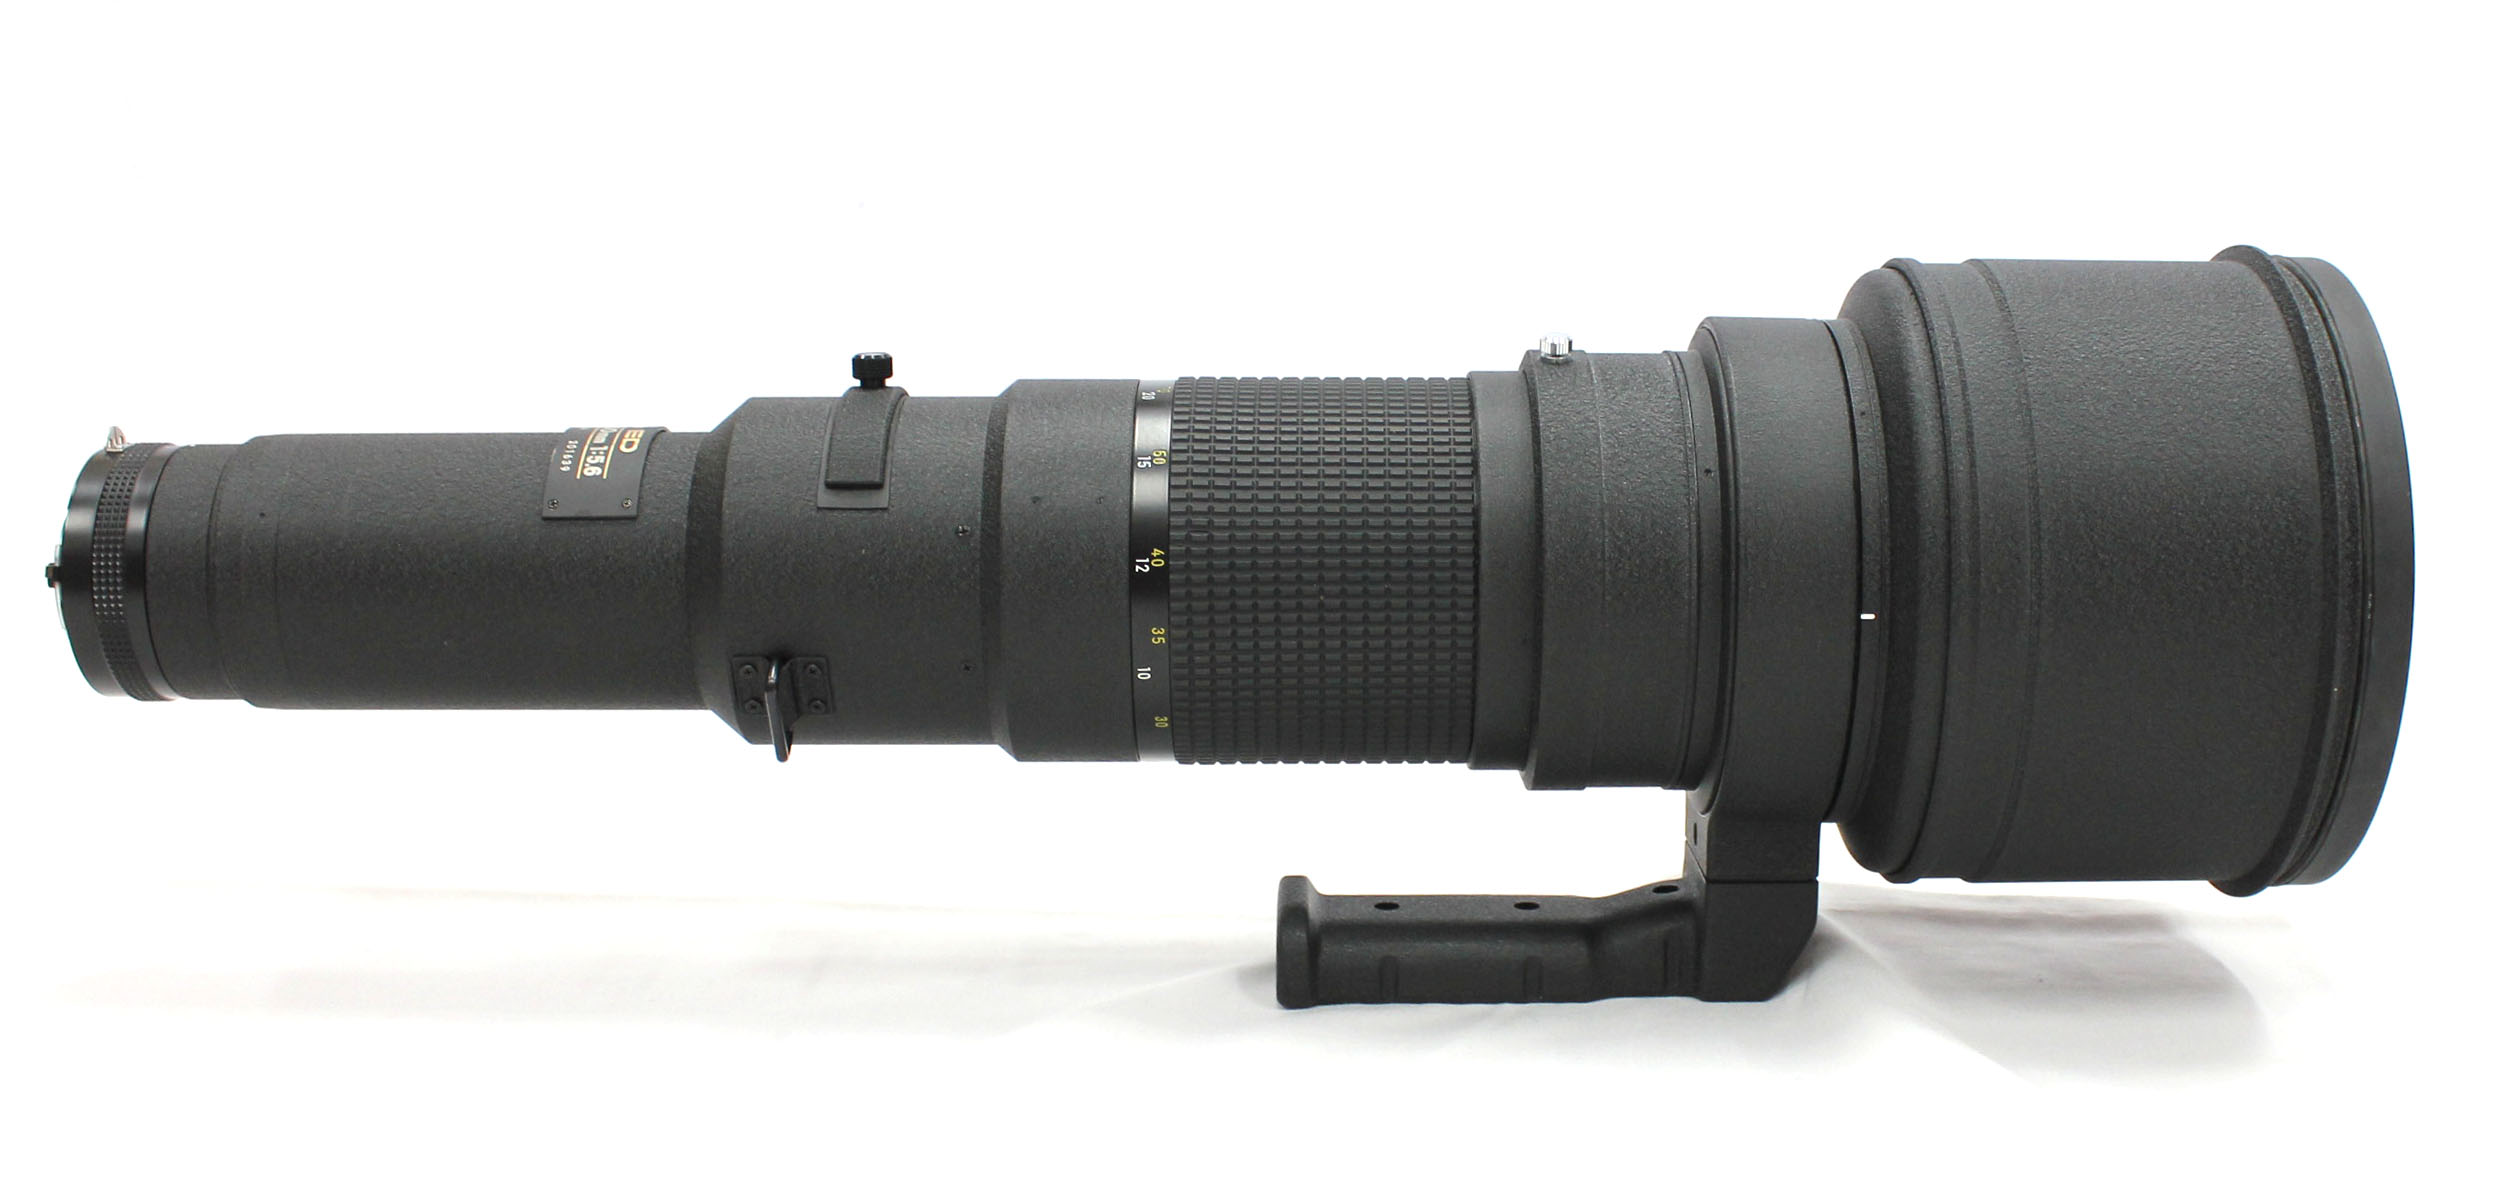  Nikon Ai-s Ais Nikkor ED 800mm F/5.6 IF Telephoto Lens in Case from Japan Photo 4